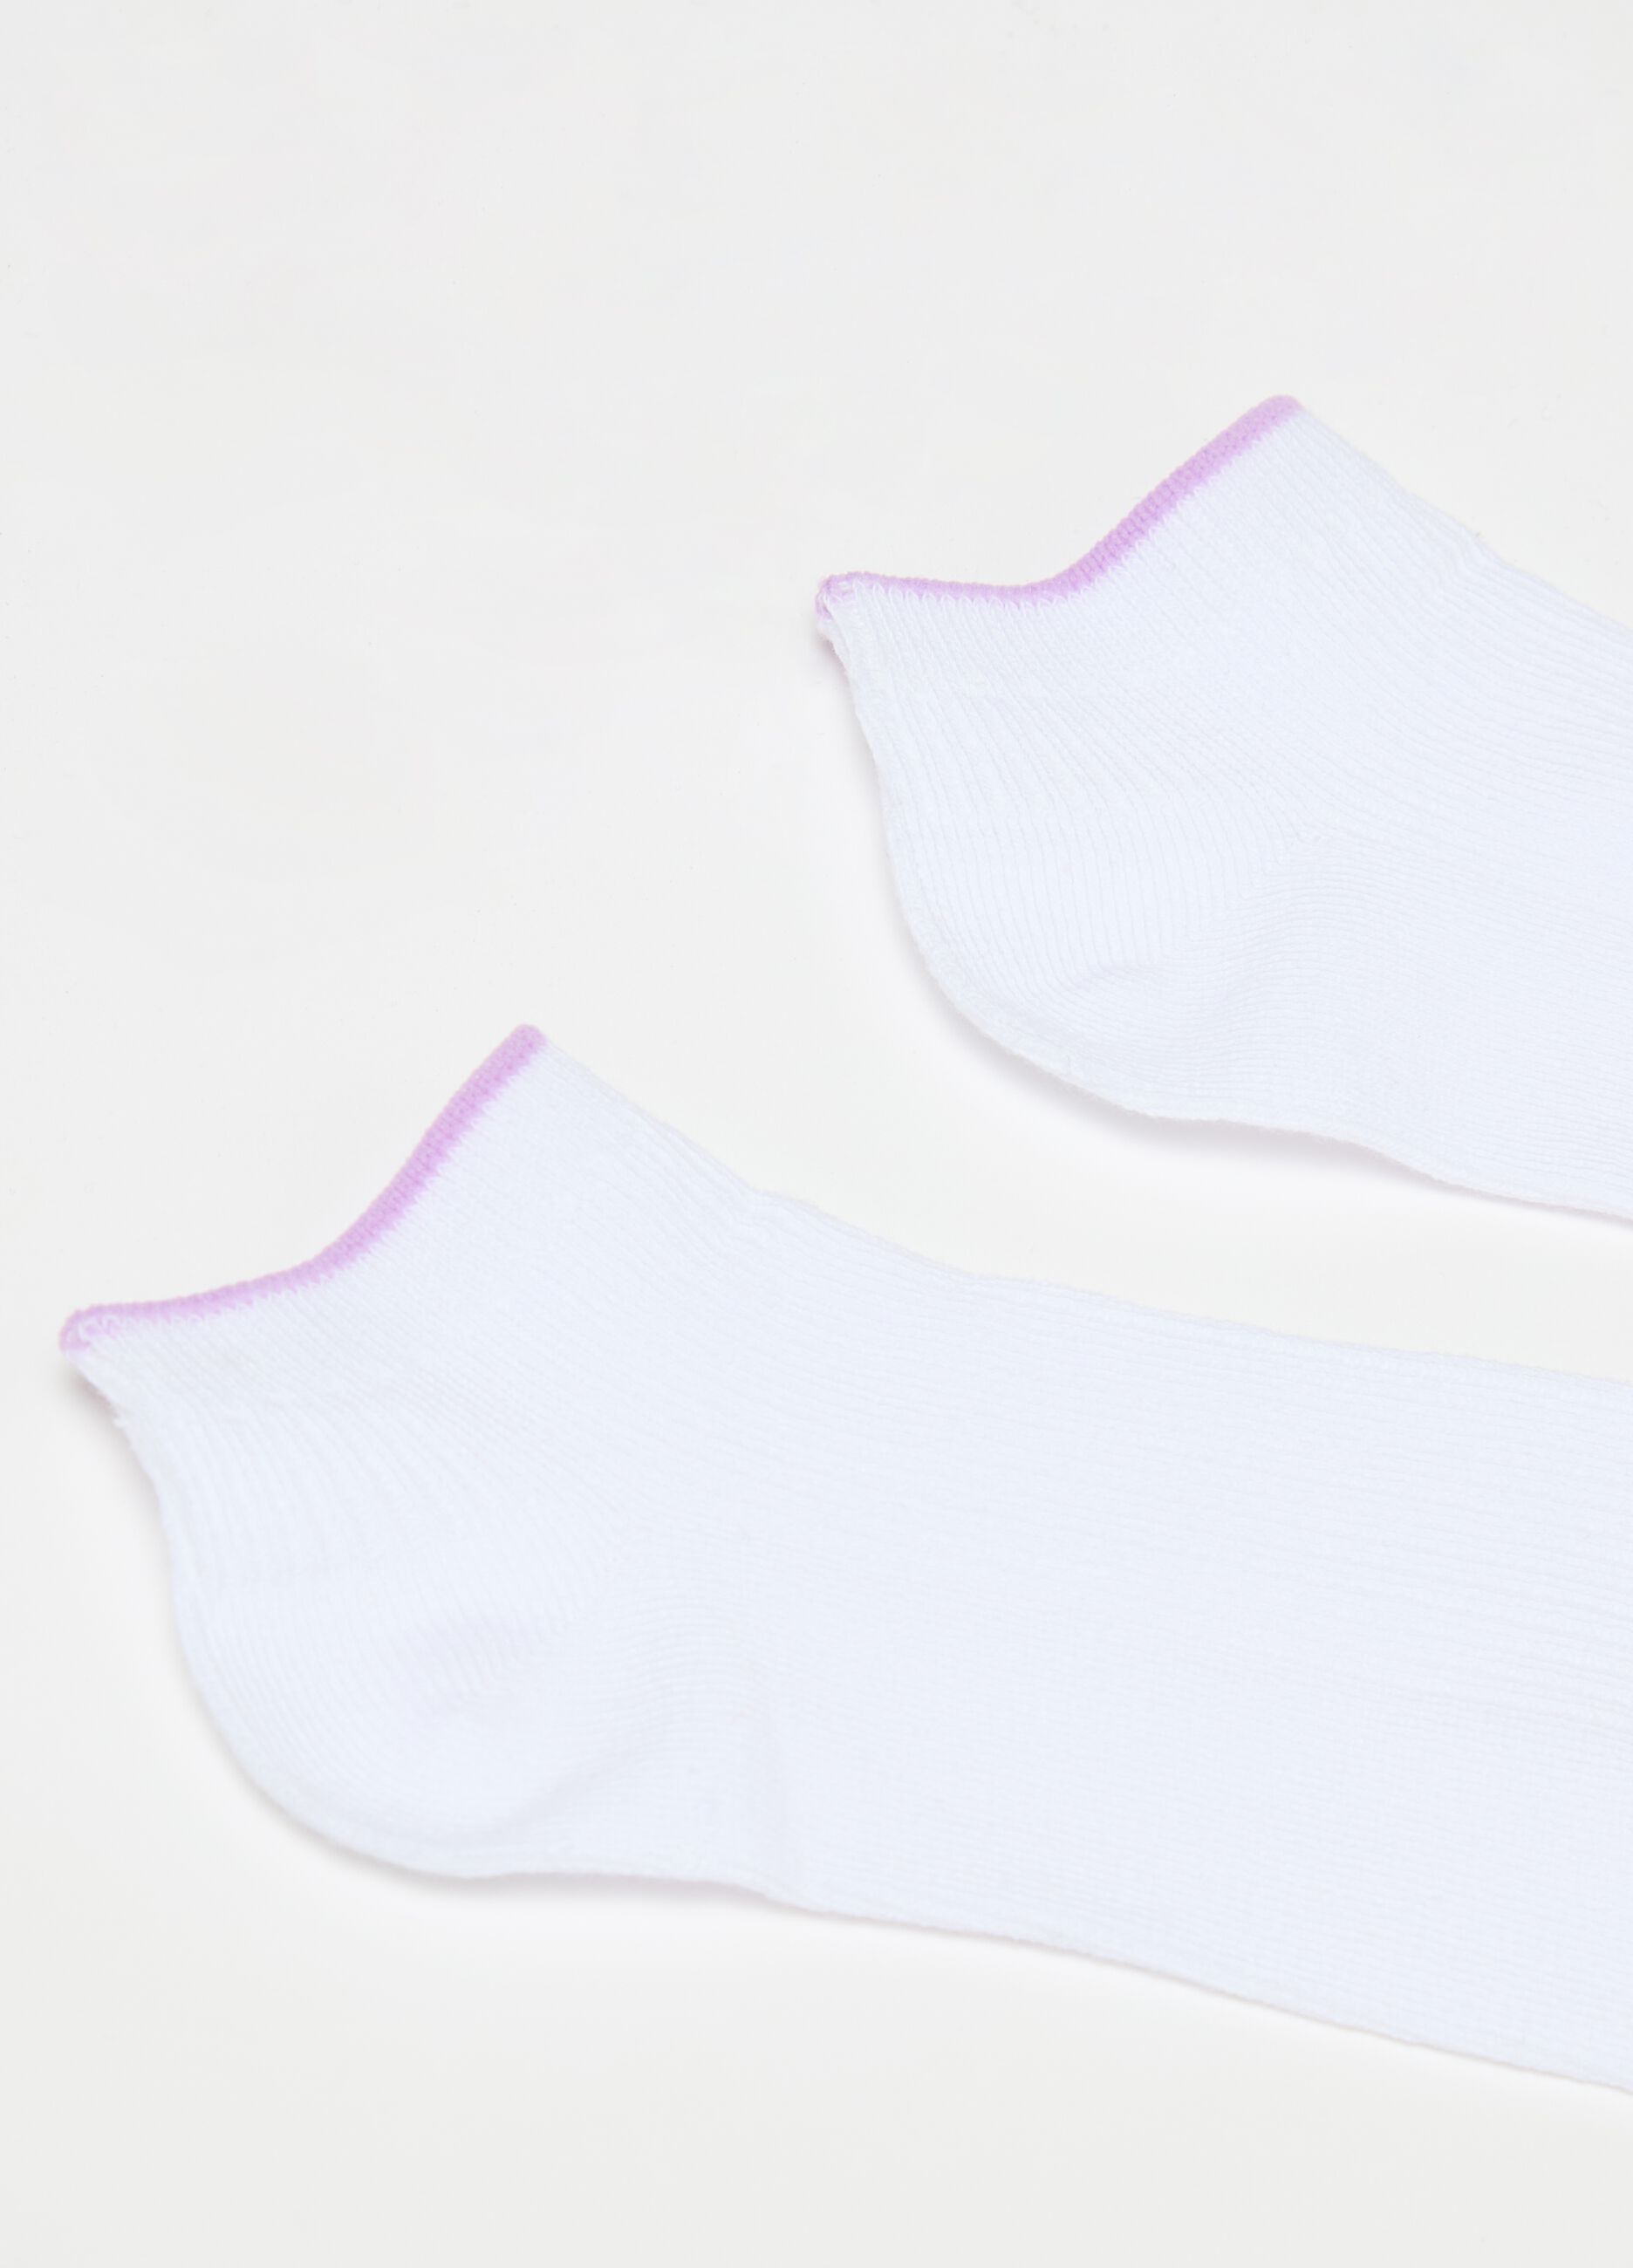 Seven-pair pack stretch shoe liners